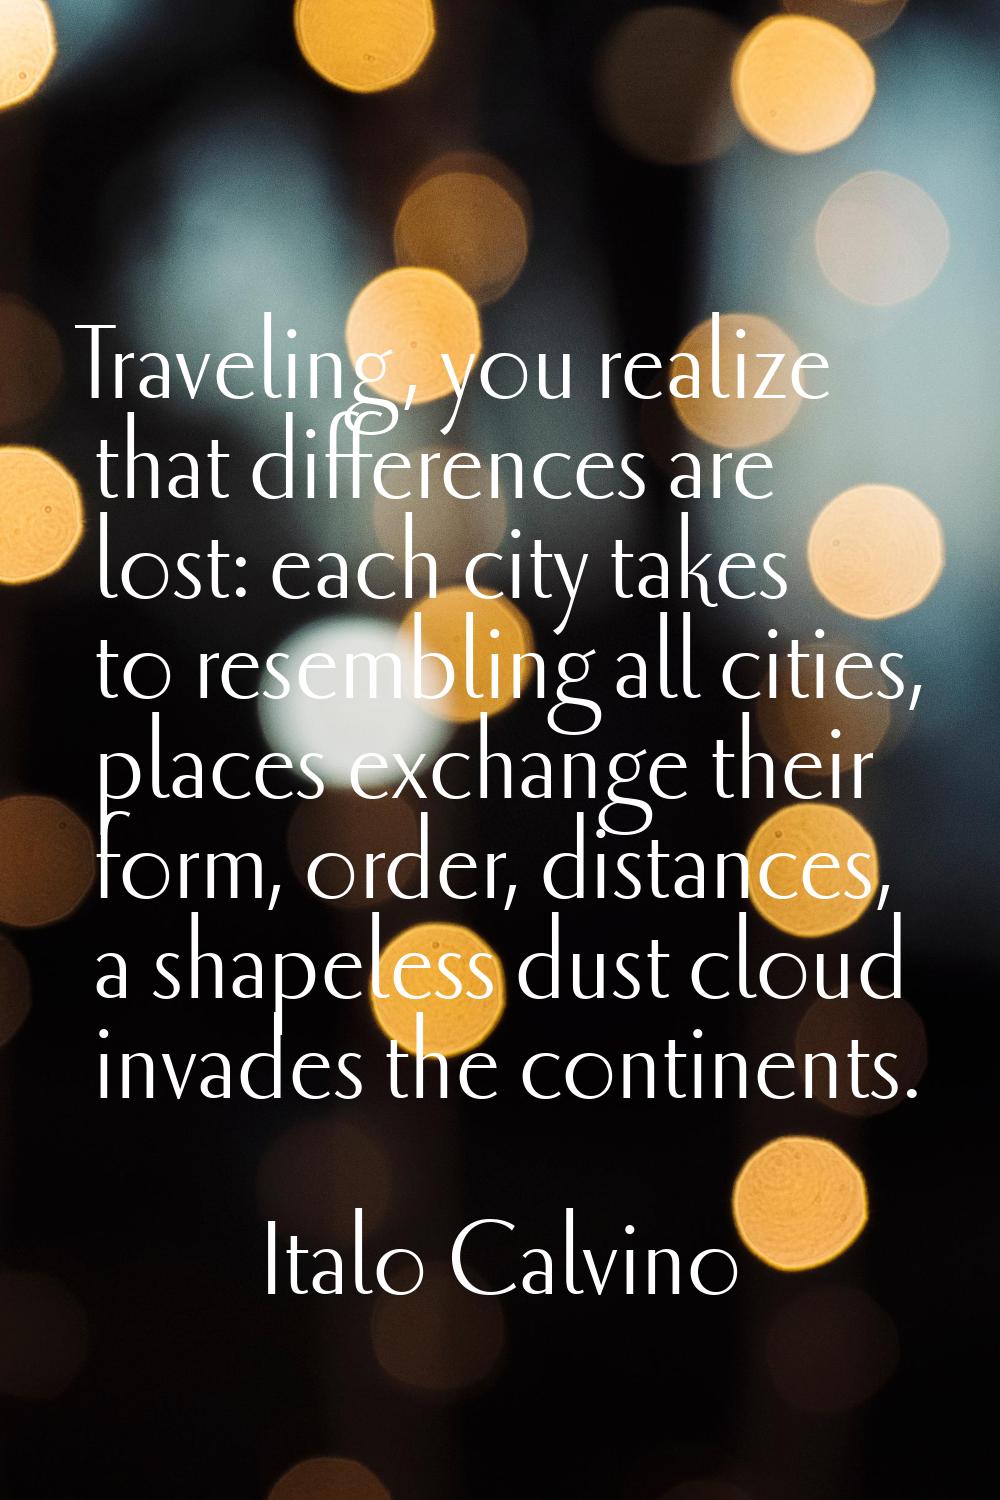 Traveling, you realize that differences are lost: each city takes to resembling all cities, places 